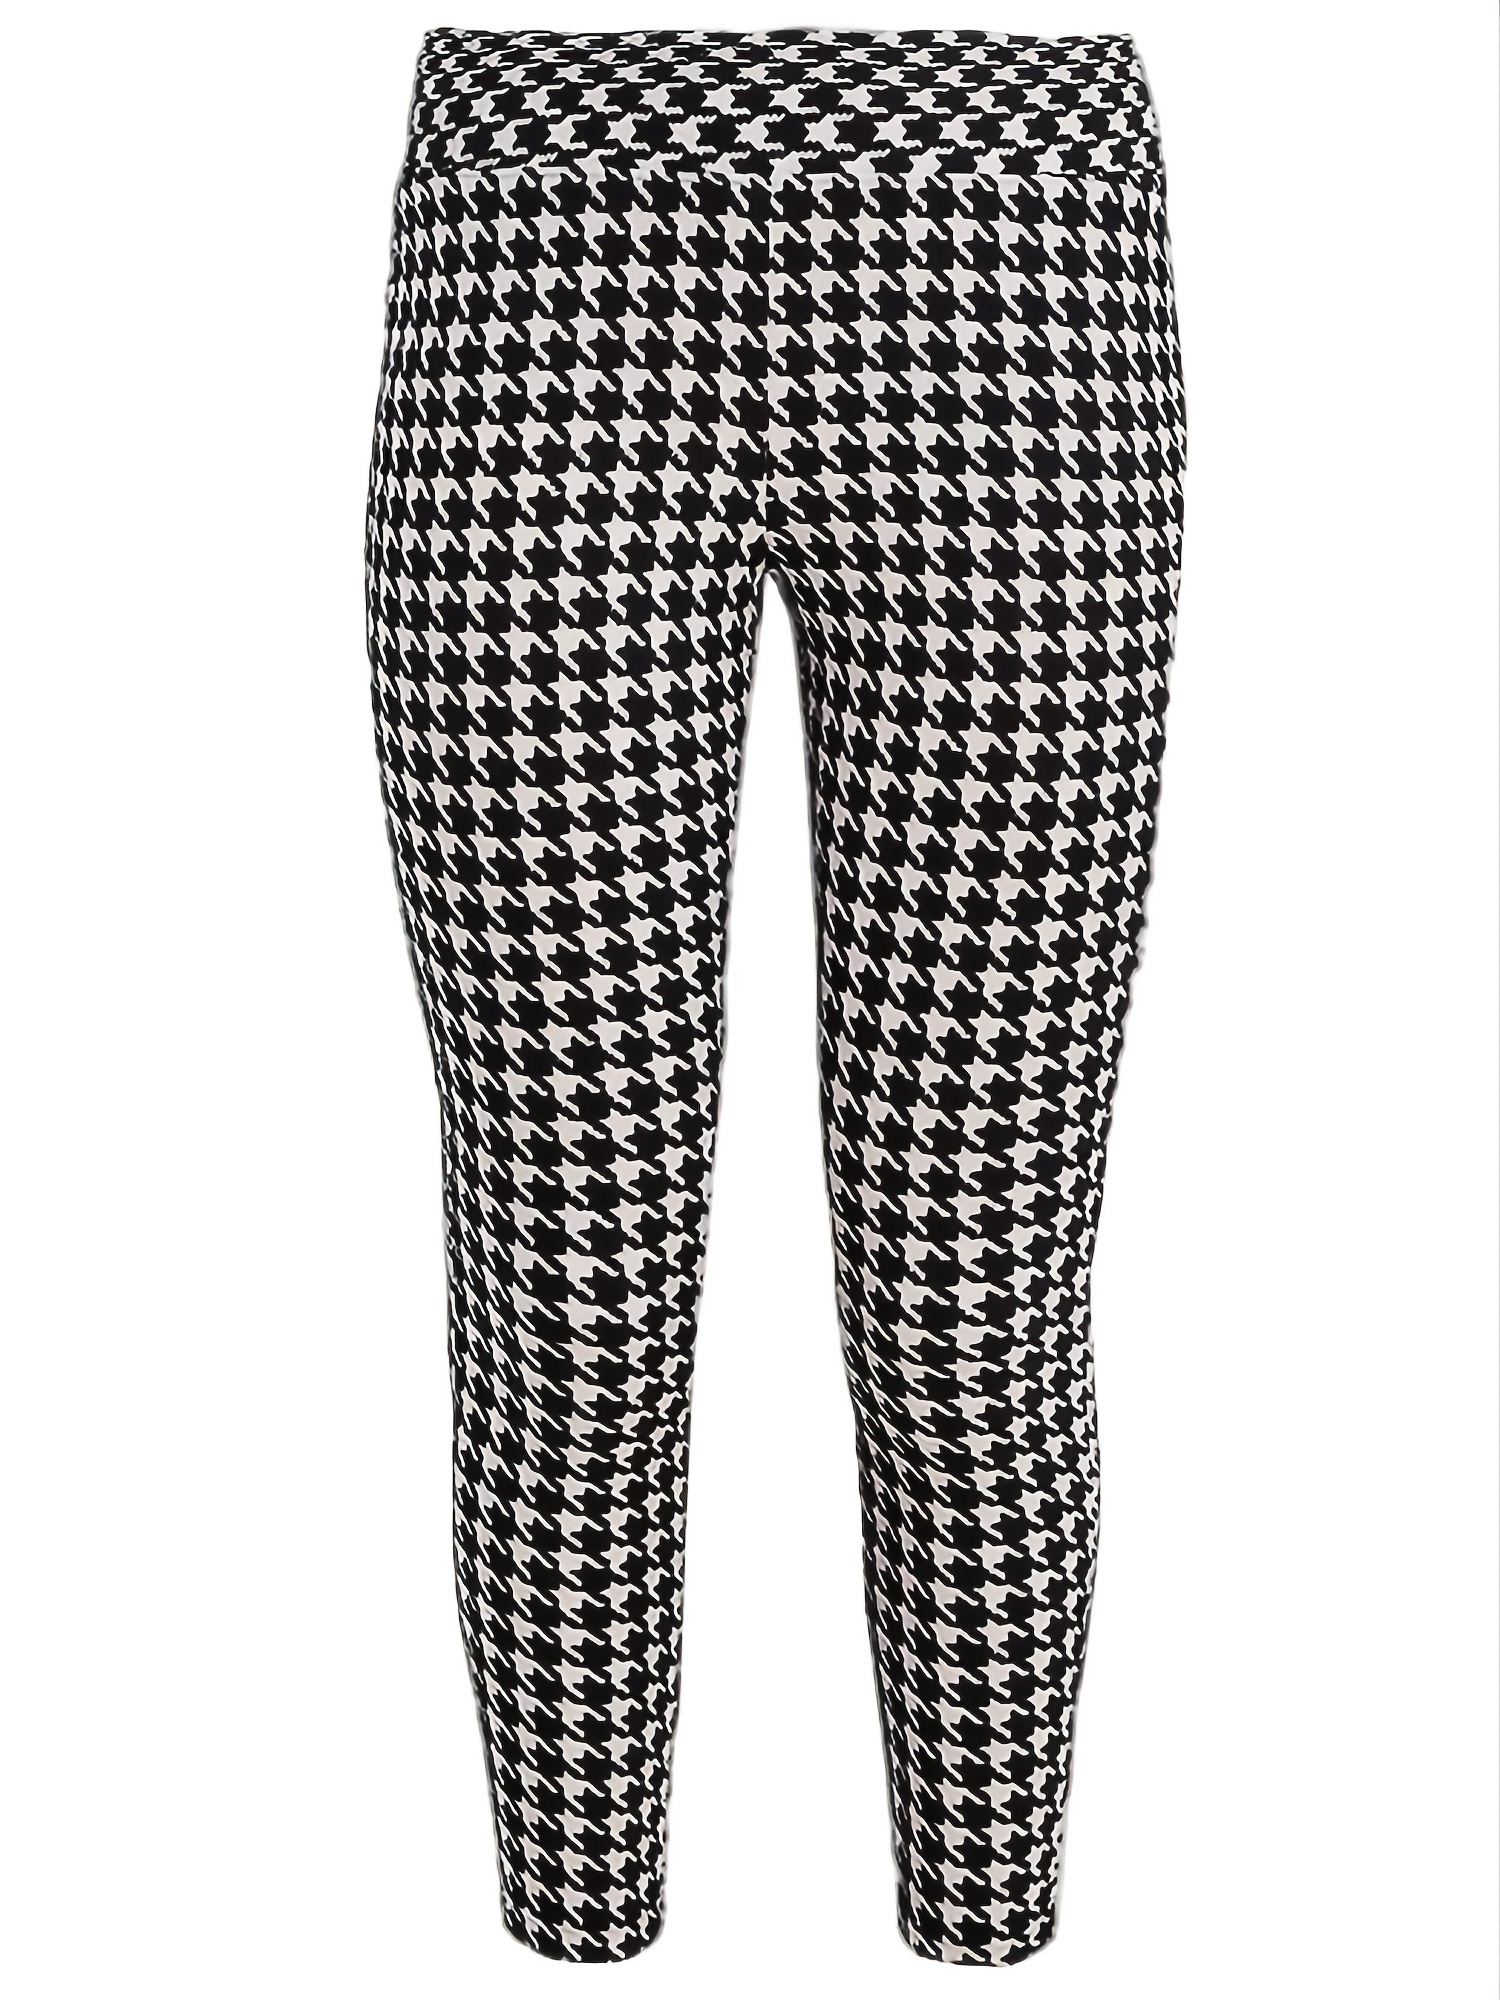 Is That The New Plus Wide Waistband Gingham Leggings ??